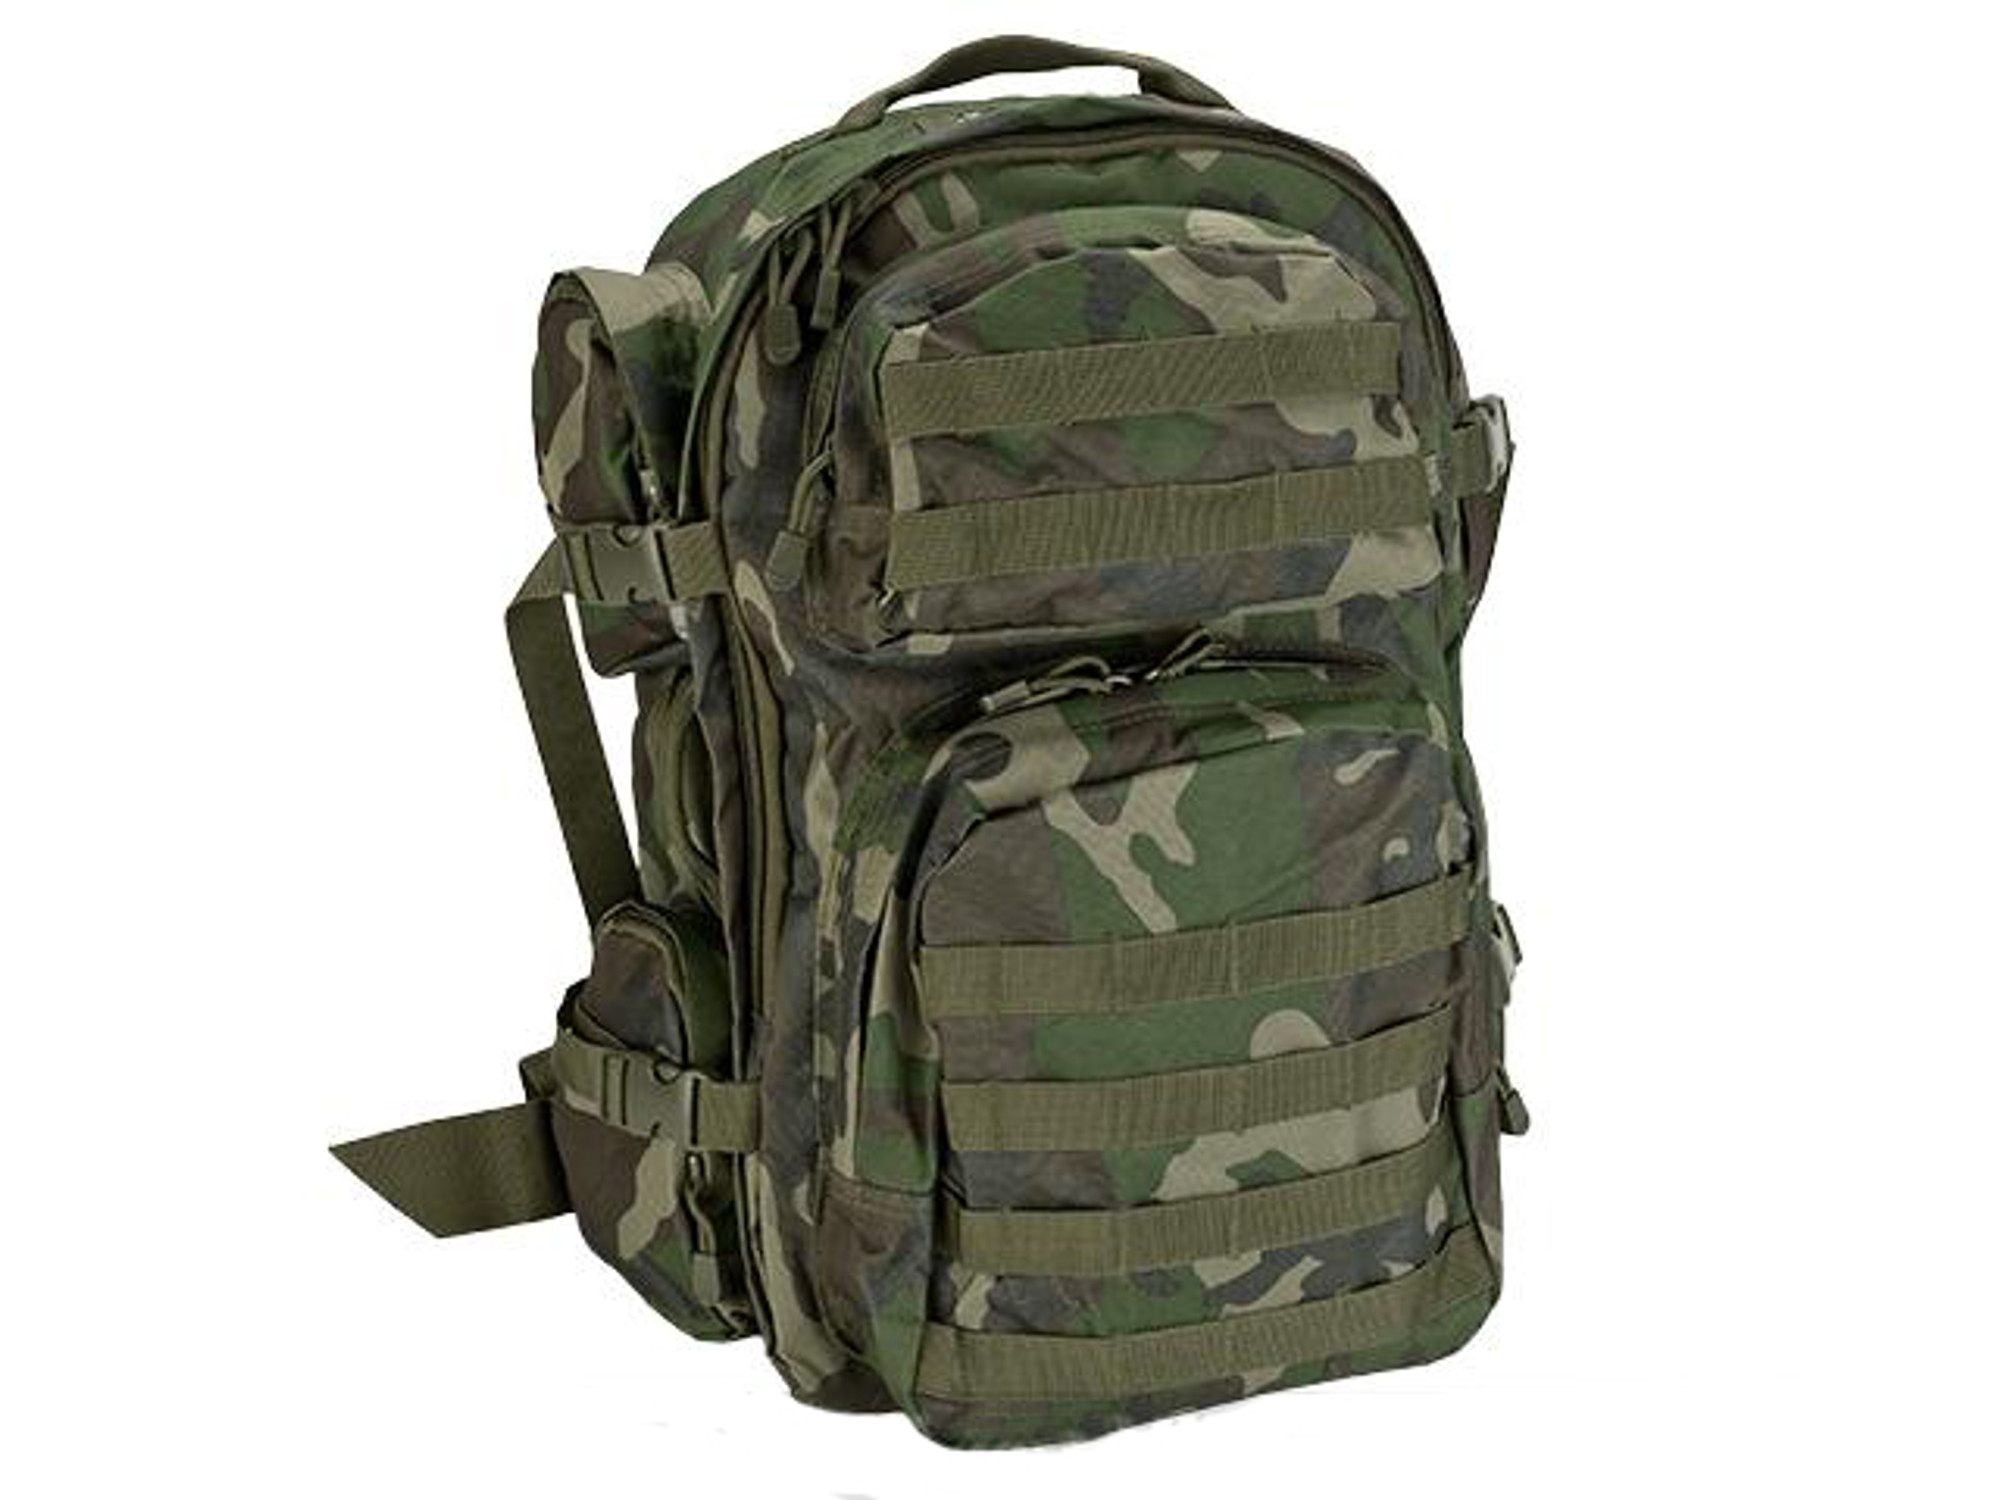 NcSTAR Tactical Assault Pack / MOLLE Backpack (Color: Woodland)